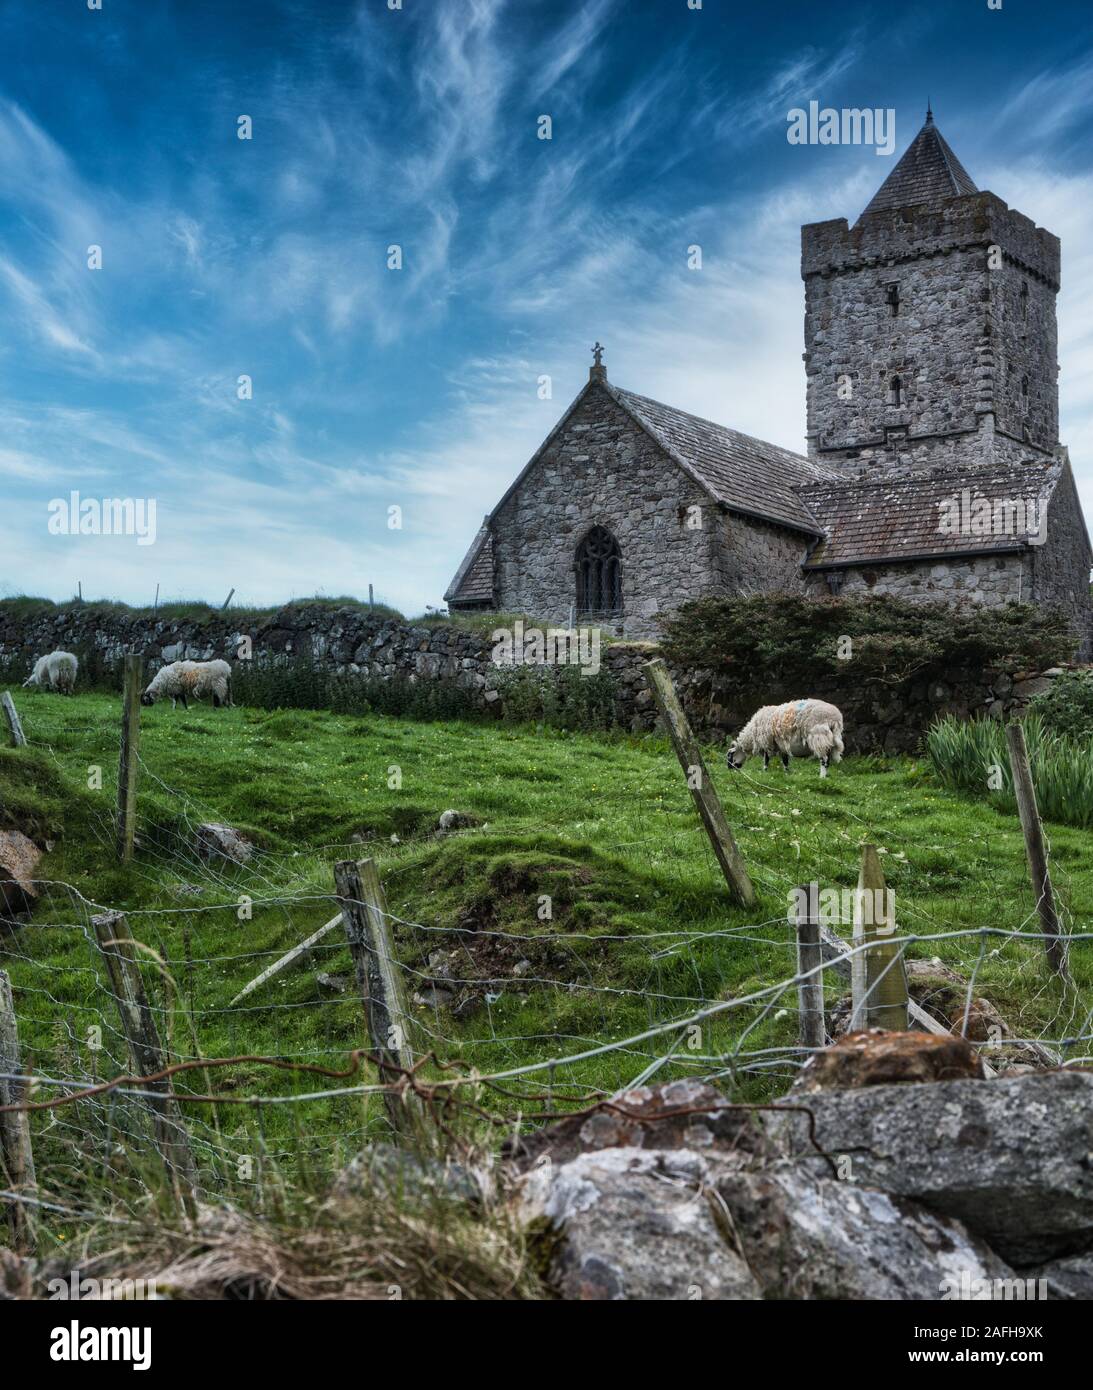 St Clement's Church, Rodel, Isle of Harris, Outer Hebrides, Scotland Stock Photo